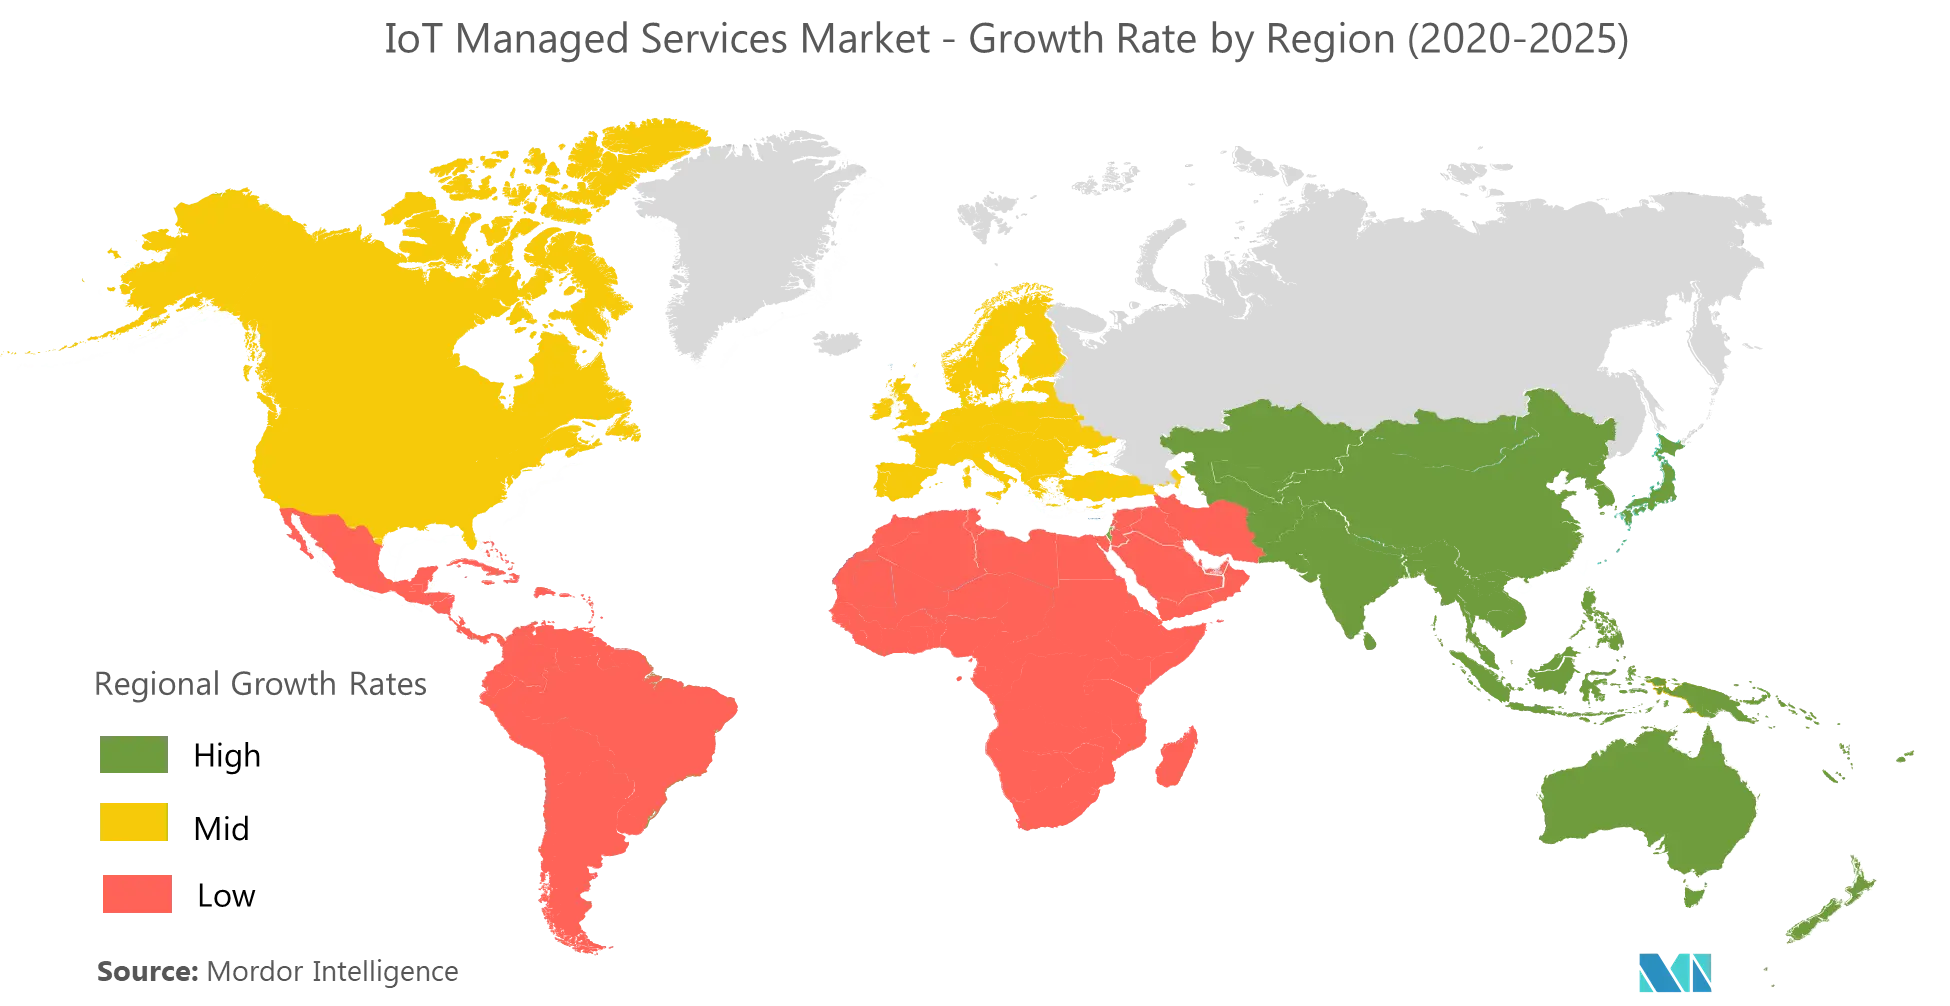 internet of things managed services market